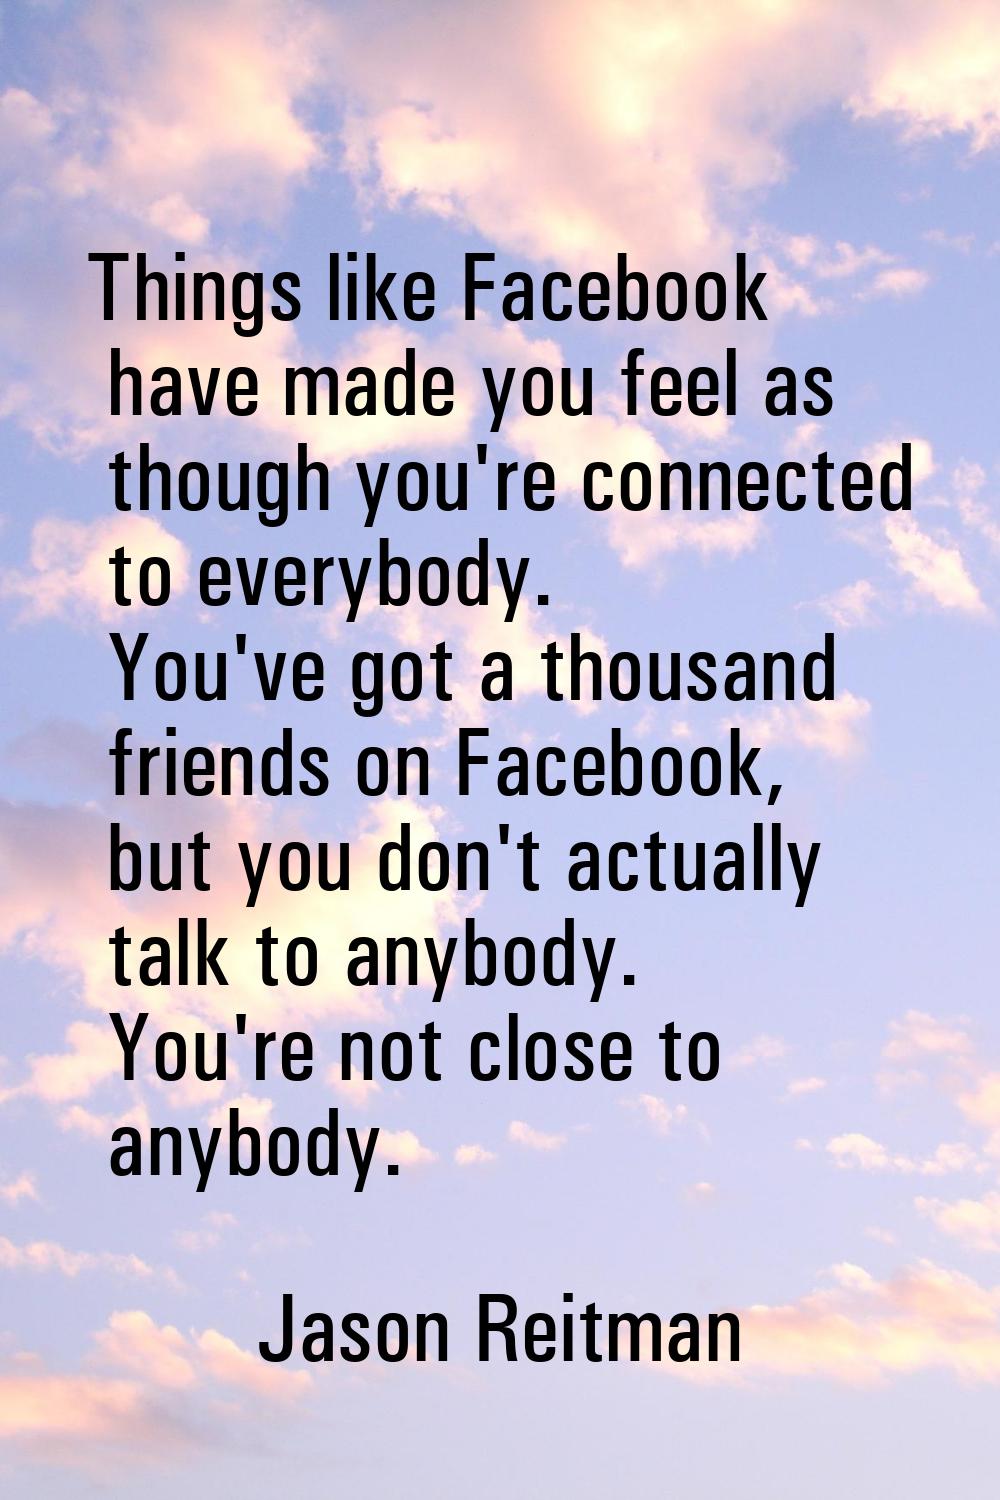 Things like Facebook have made you feel as though you're connected to everybody. You've got a thous